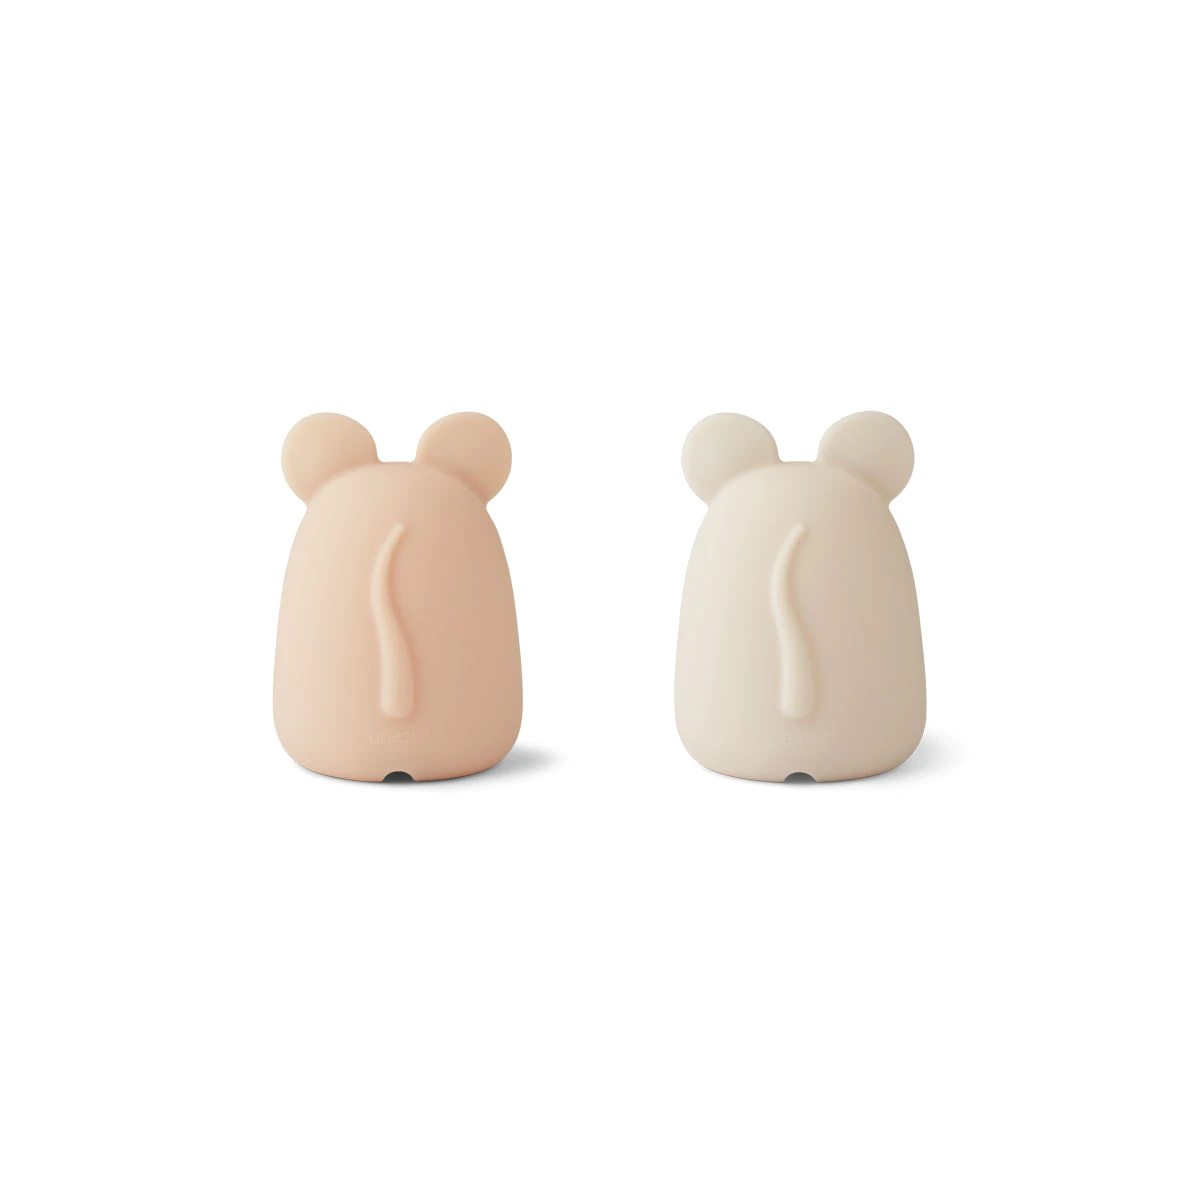 Liewood, Callie nattlampa, Mouse pale tuscany sandy, 2-pack 